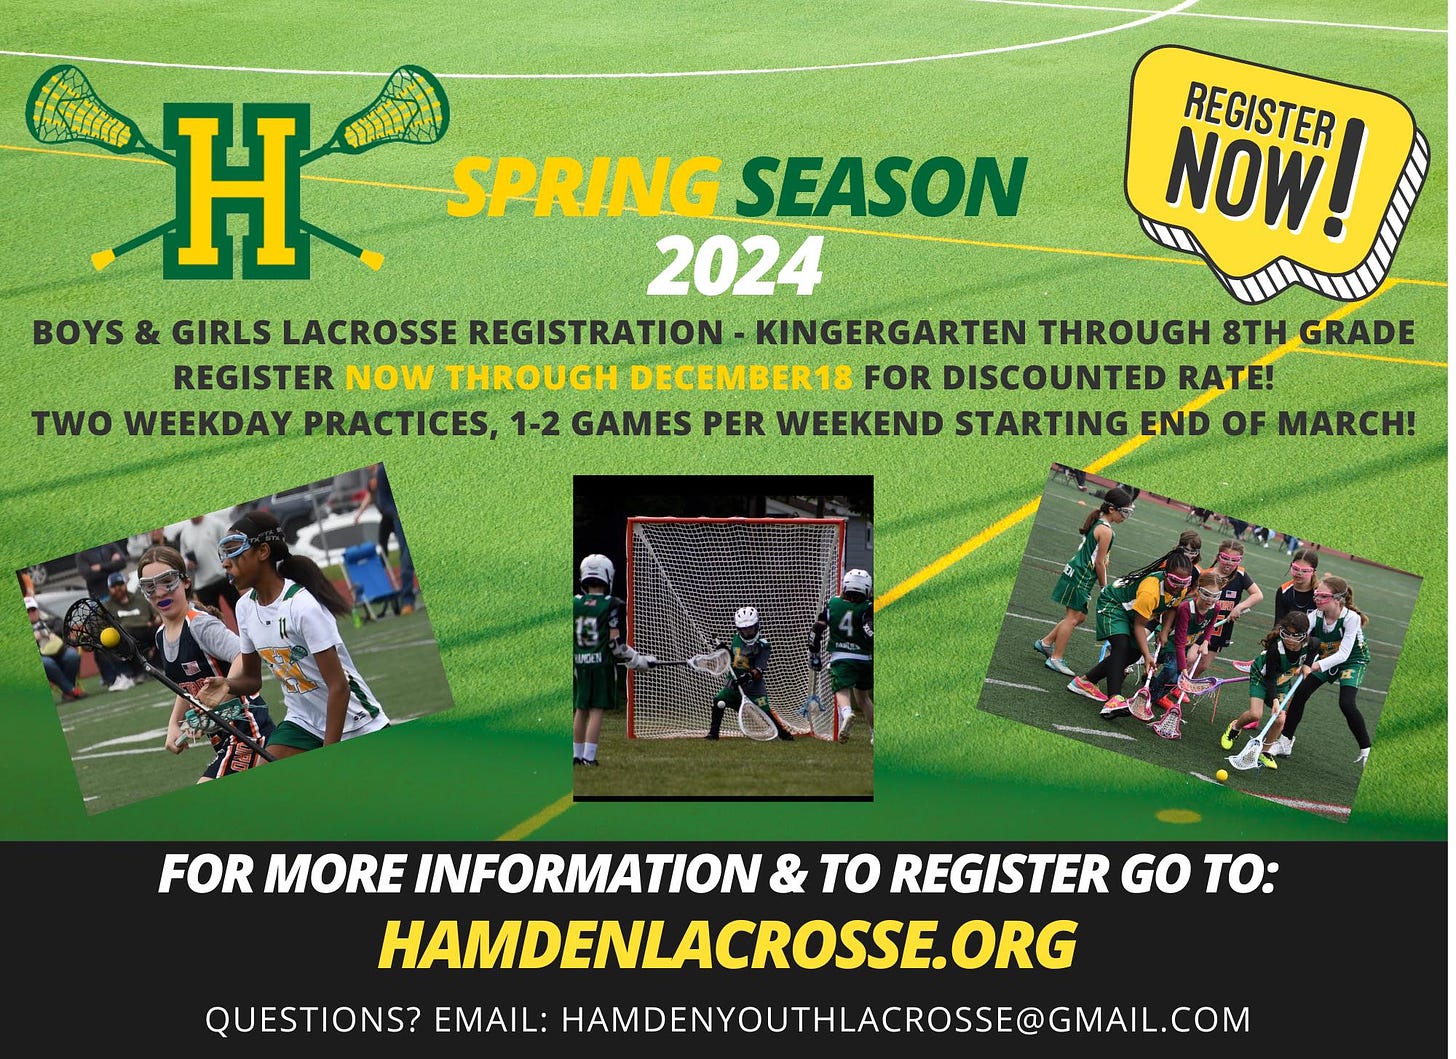 May be an image of 6 people and text that says 'REGISTER NOW! H SPRING SEASON 2024 BOYS & GIRLS LACROSSE REGISTRATION KINGERGARTEN THROUGH 8TH GRADE REGISTER NOW THROUGH DECEMBER18 FOR DISCOUNTED RATE! TWO WEEKDAY PRACTICES, 1-2 GAMES PER WEEKEND STARTING END OF MARCH! FOR MORE INFORMATION TO REGISTER GO TO: HAMDENLACROSSE ORG QUESTIONS? EMAIL: HAMDENYOUTHLACROSSE@GMAIL.COM'